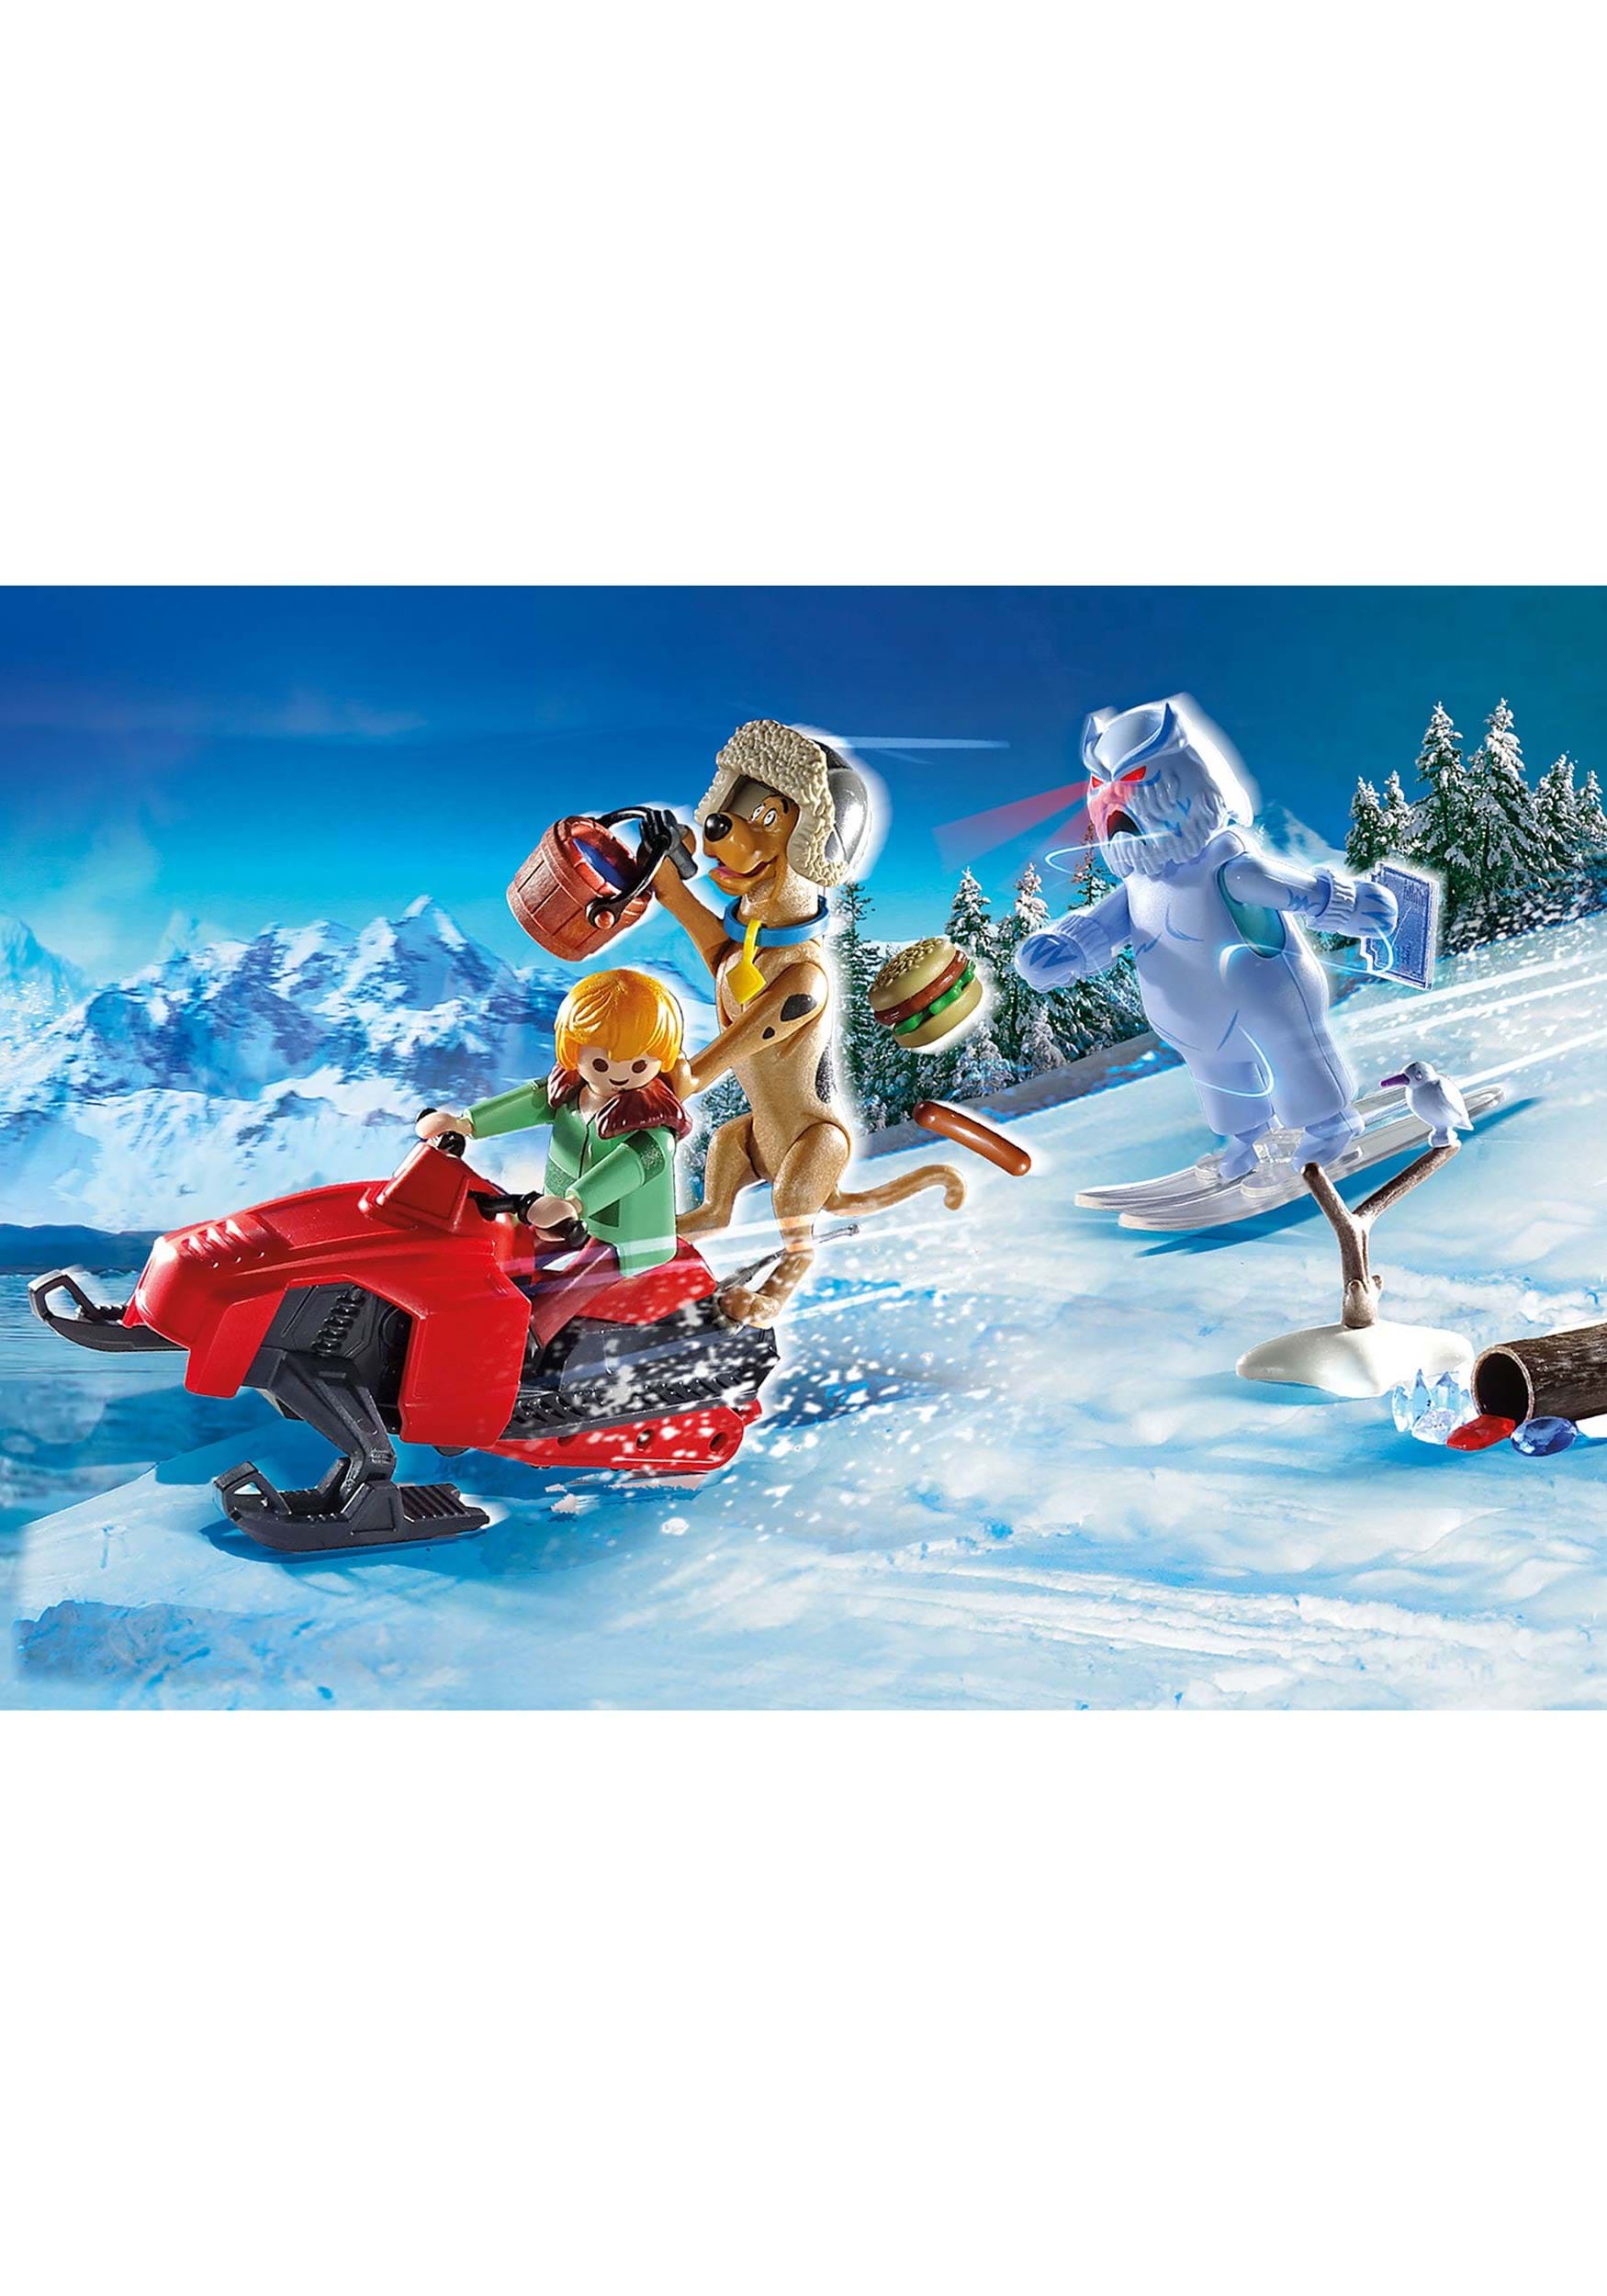 Scooby-Doo! Adventure with Ghost Clown - Playmobil – The Red